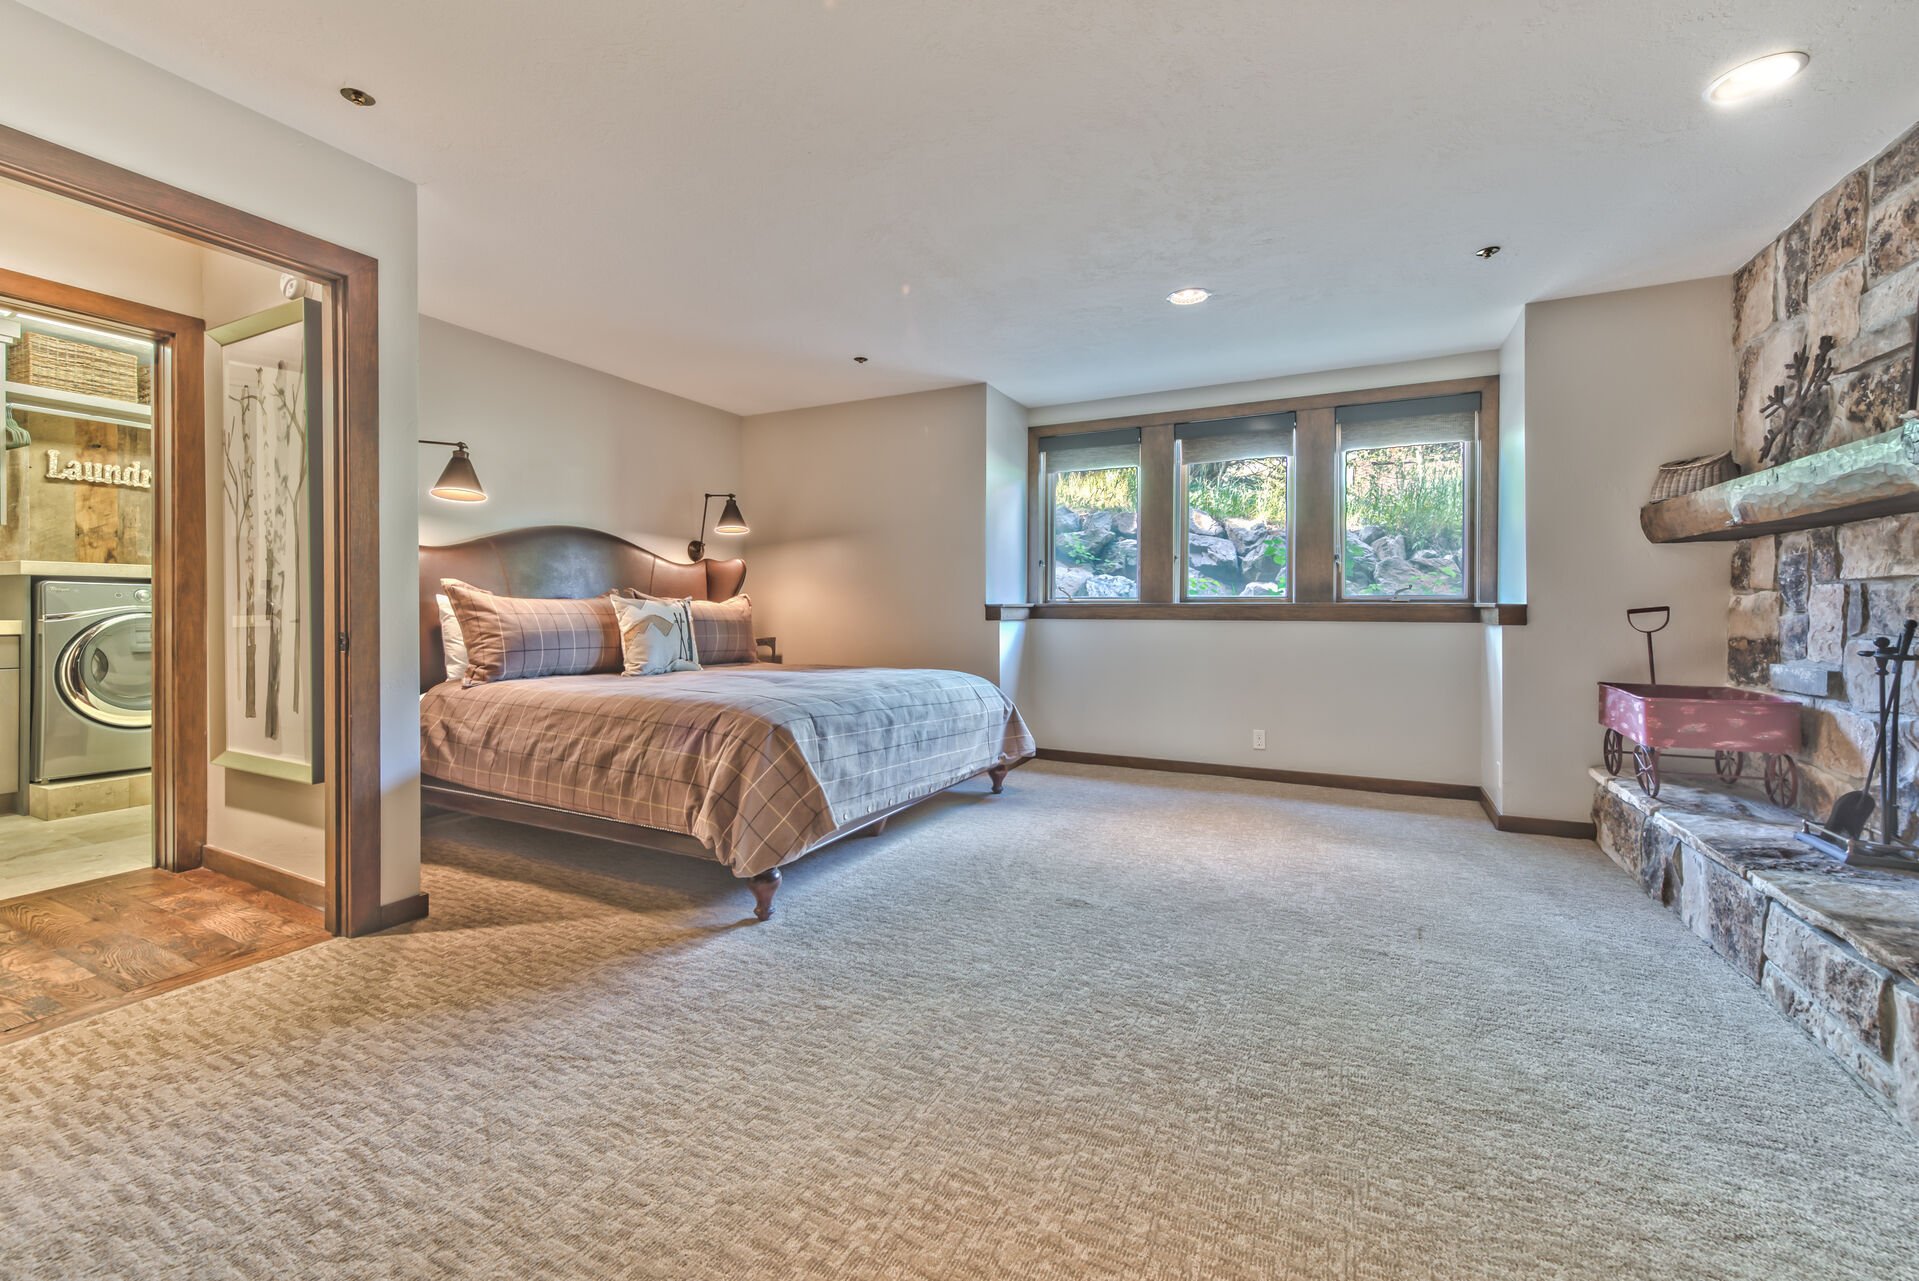 Lower Level Master Bedroom with King Bed, Smart TV, Wood Fireplace and Private Bath with a Tile Shower